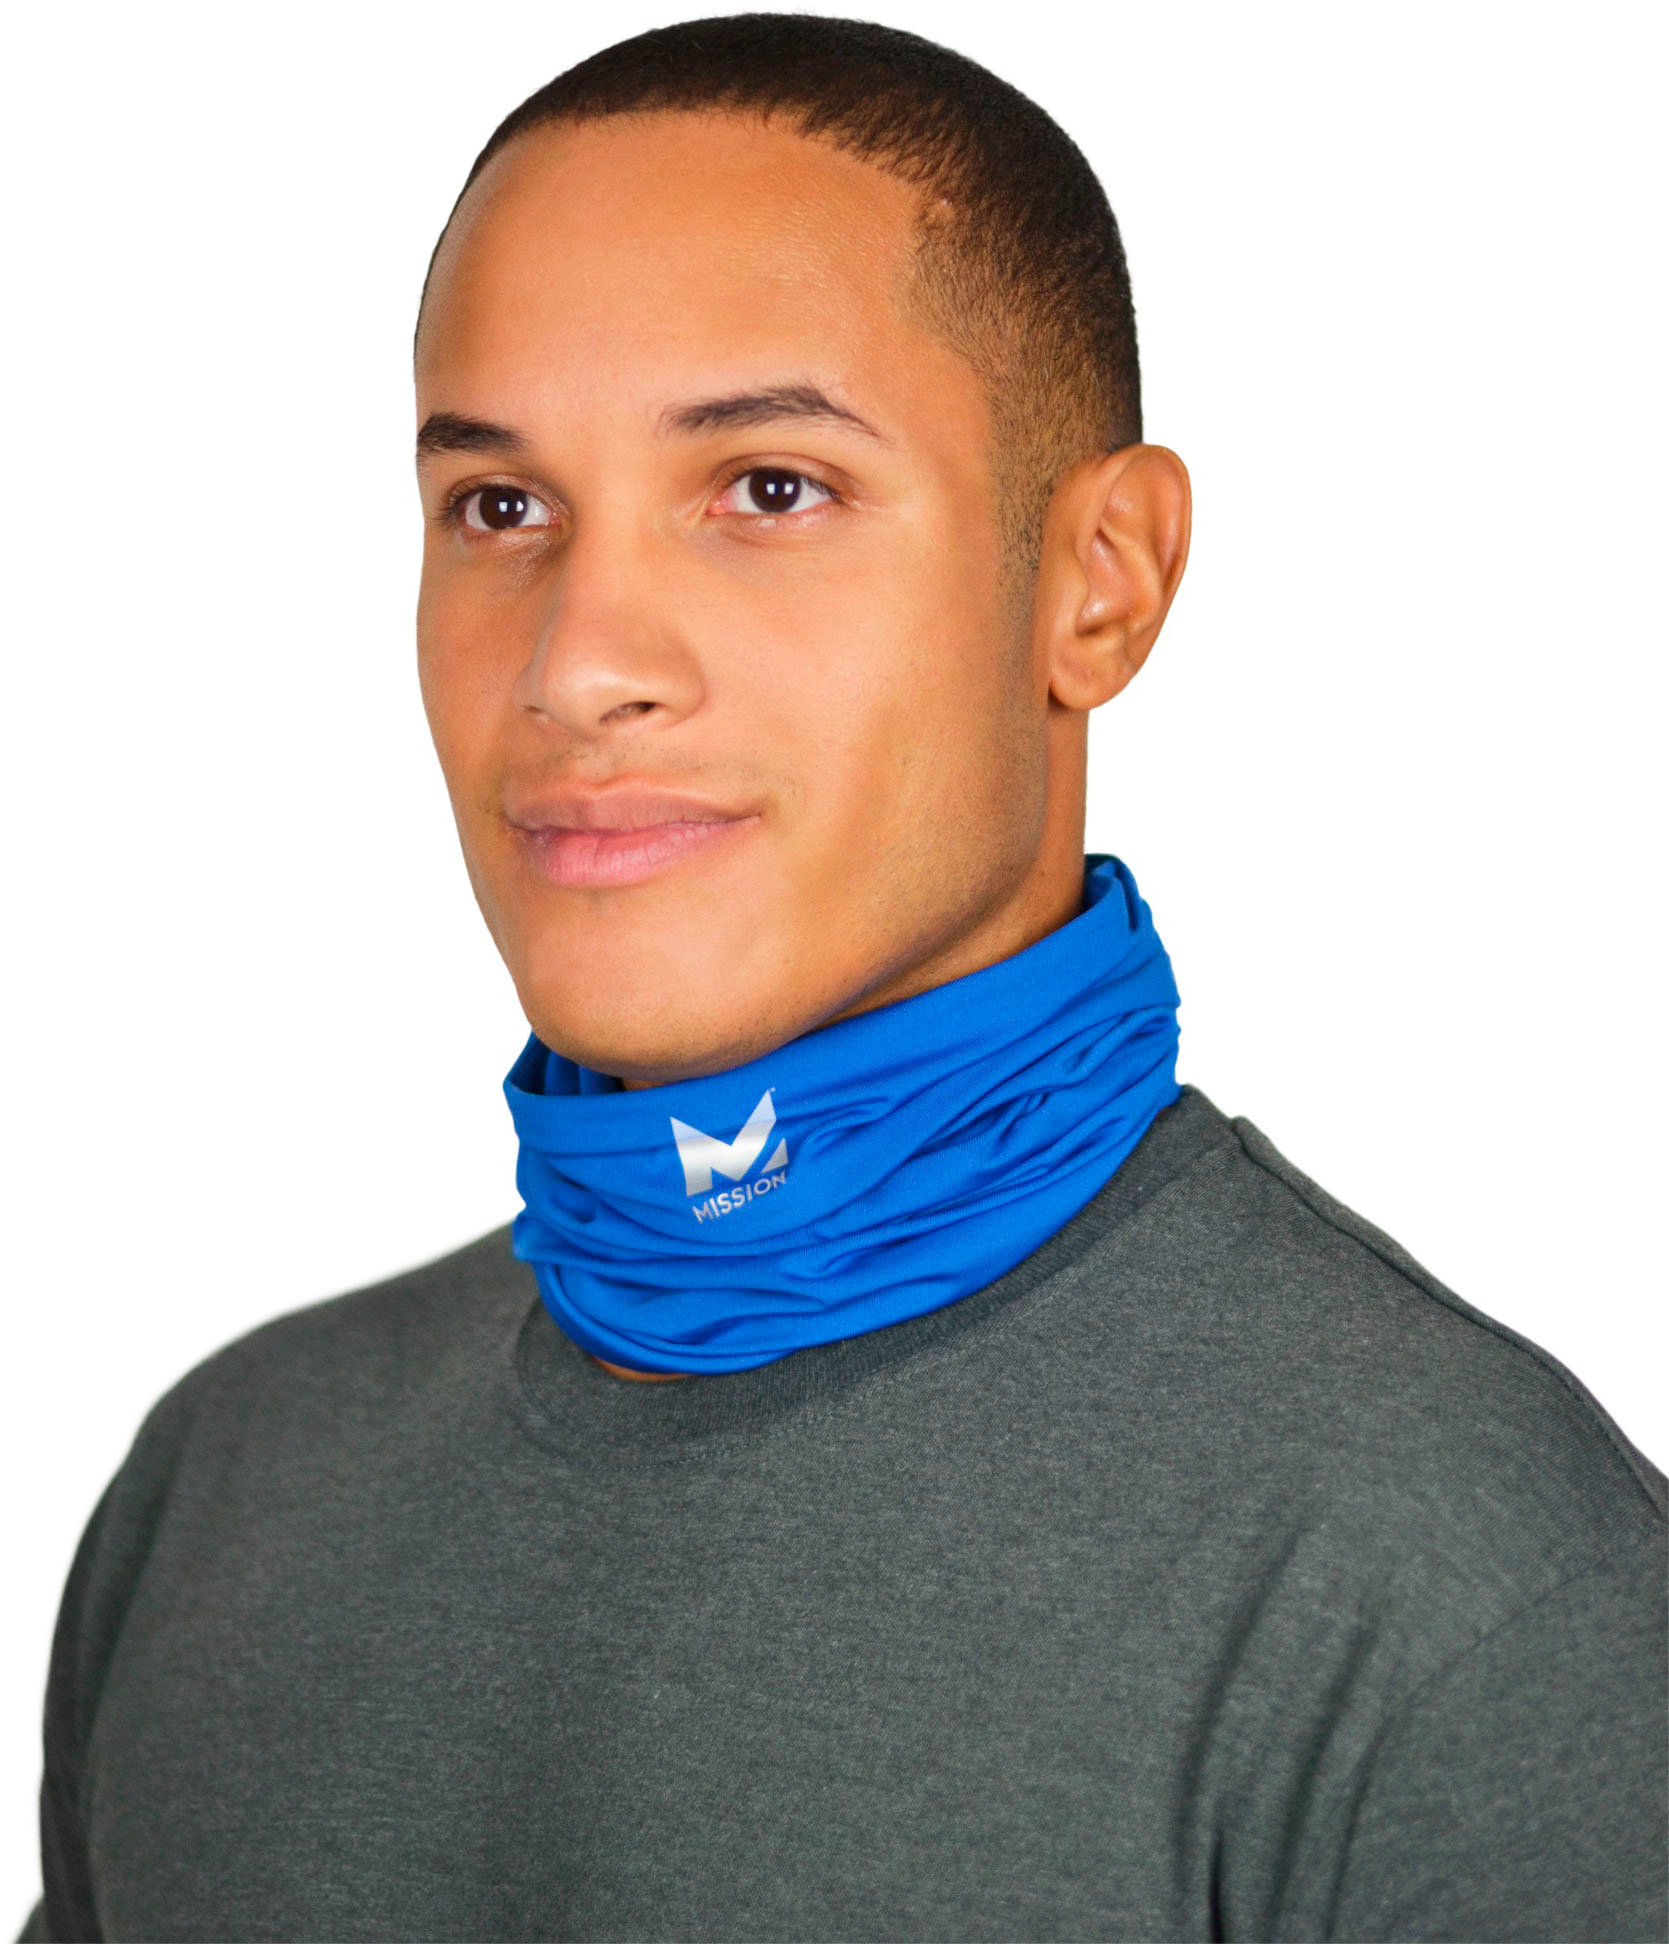 BLUE Details about   MISSION Compact Cooling Neck Gaiter Face/Neck Cover/Mask 